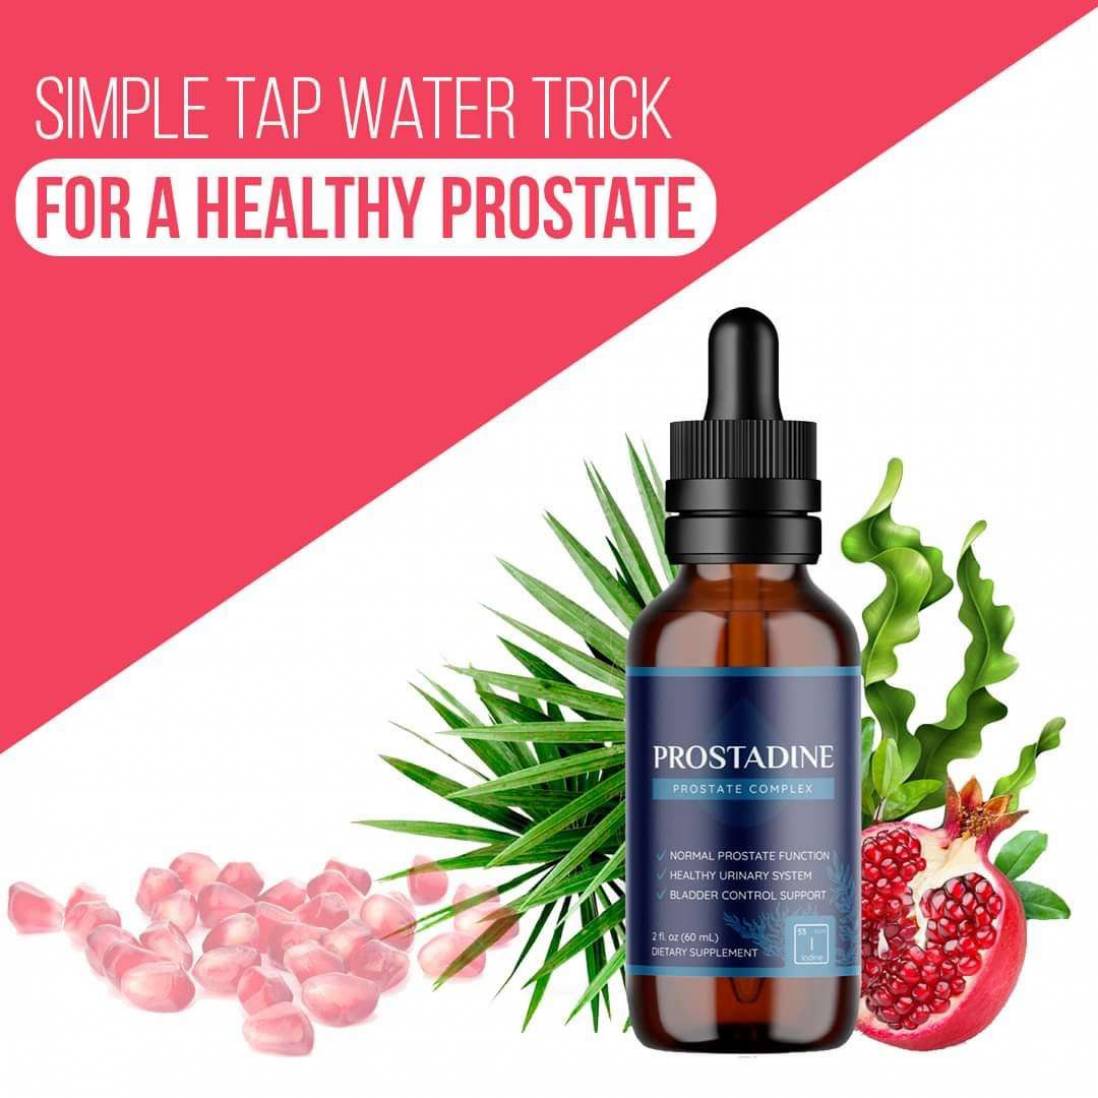 Water Trick For Healthy Prostate